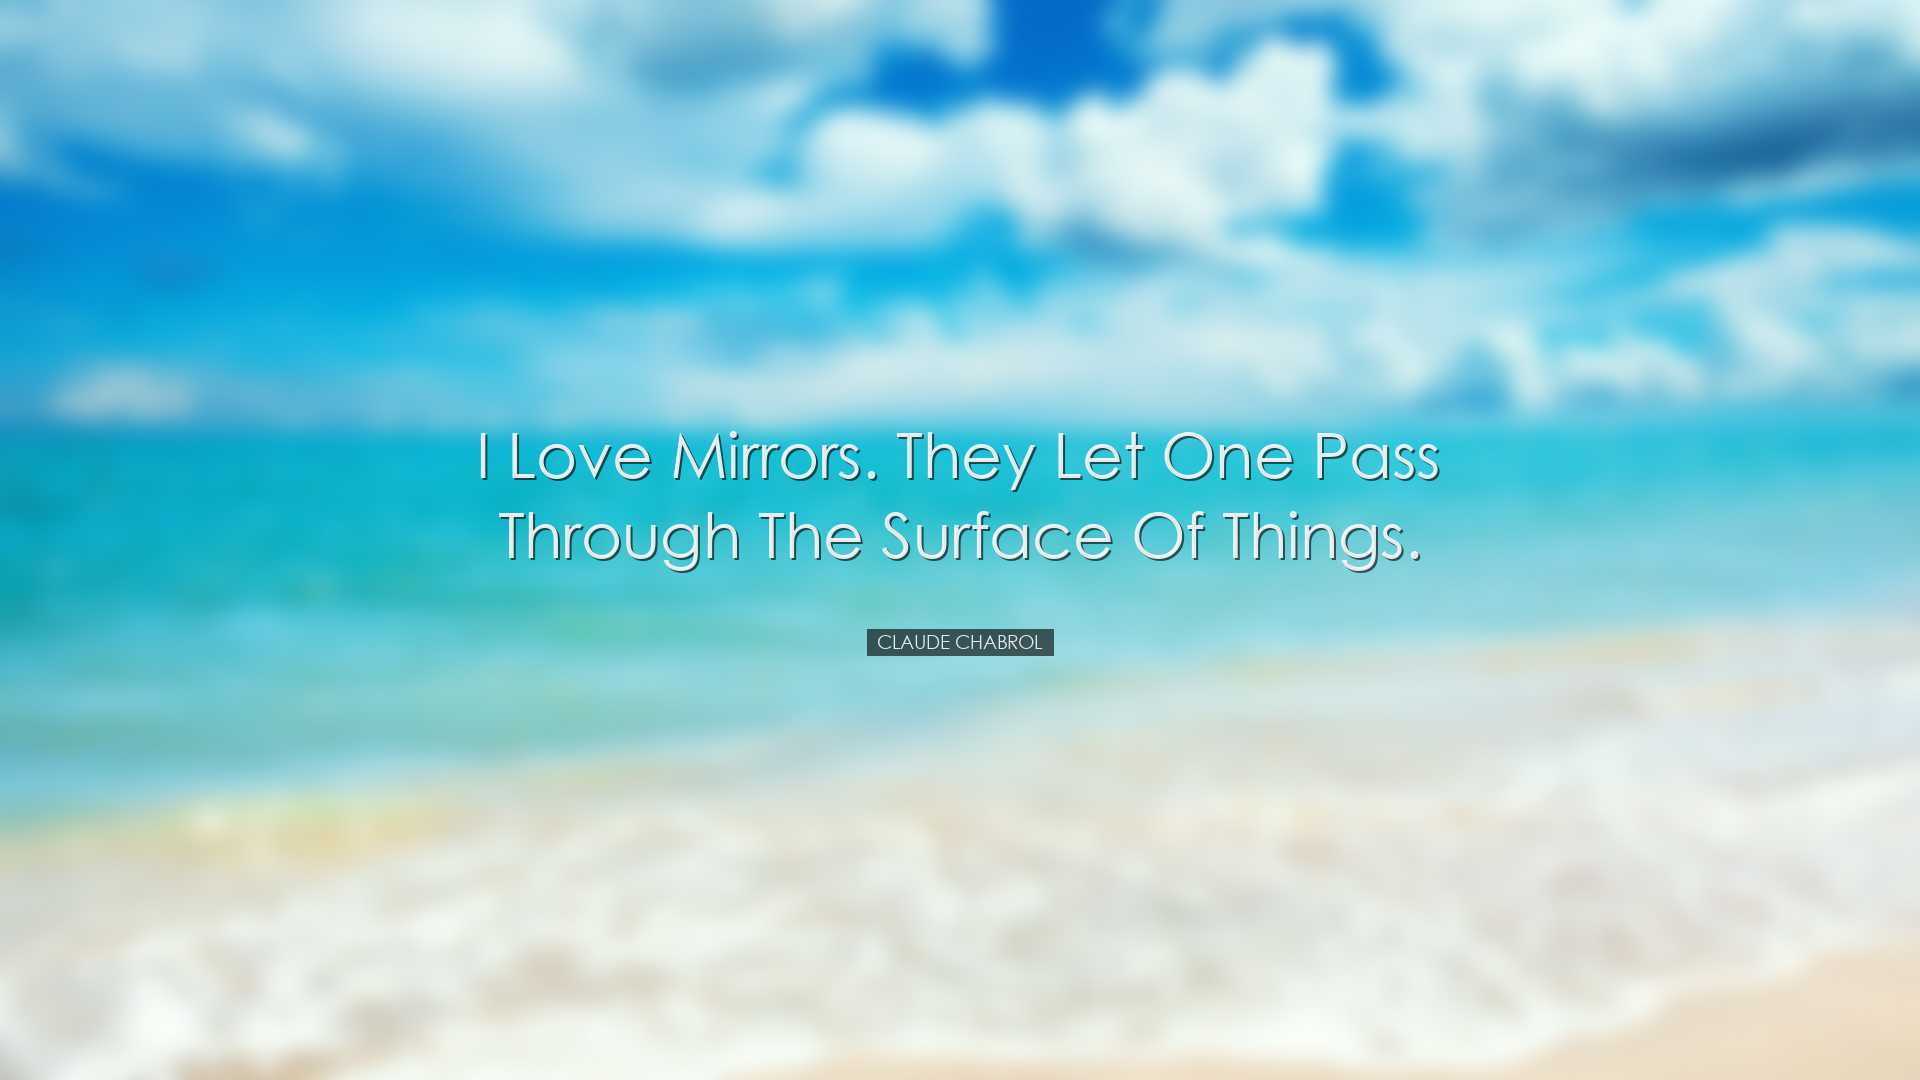 I love mirrors. They let one pass through the surface of things. -